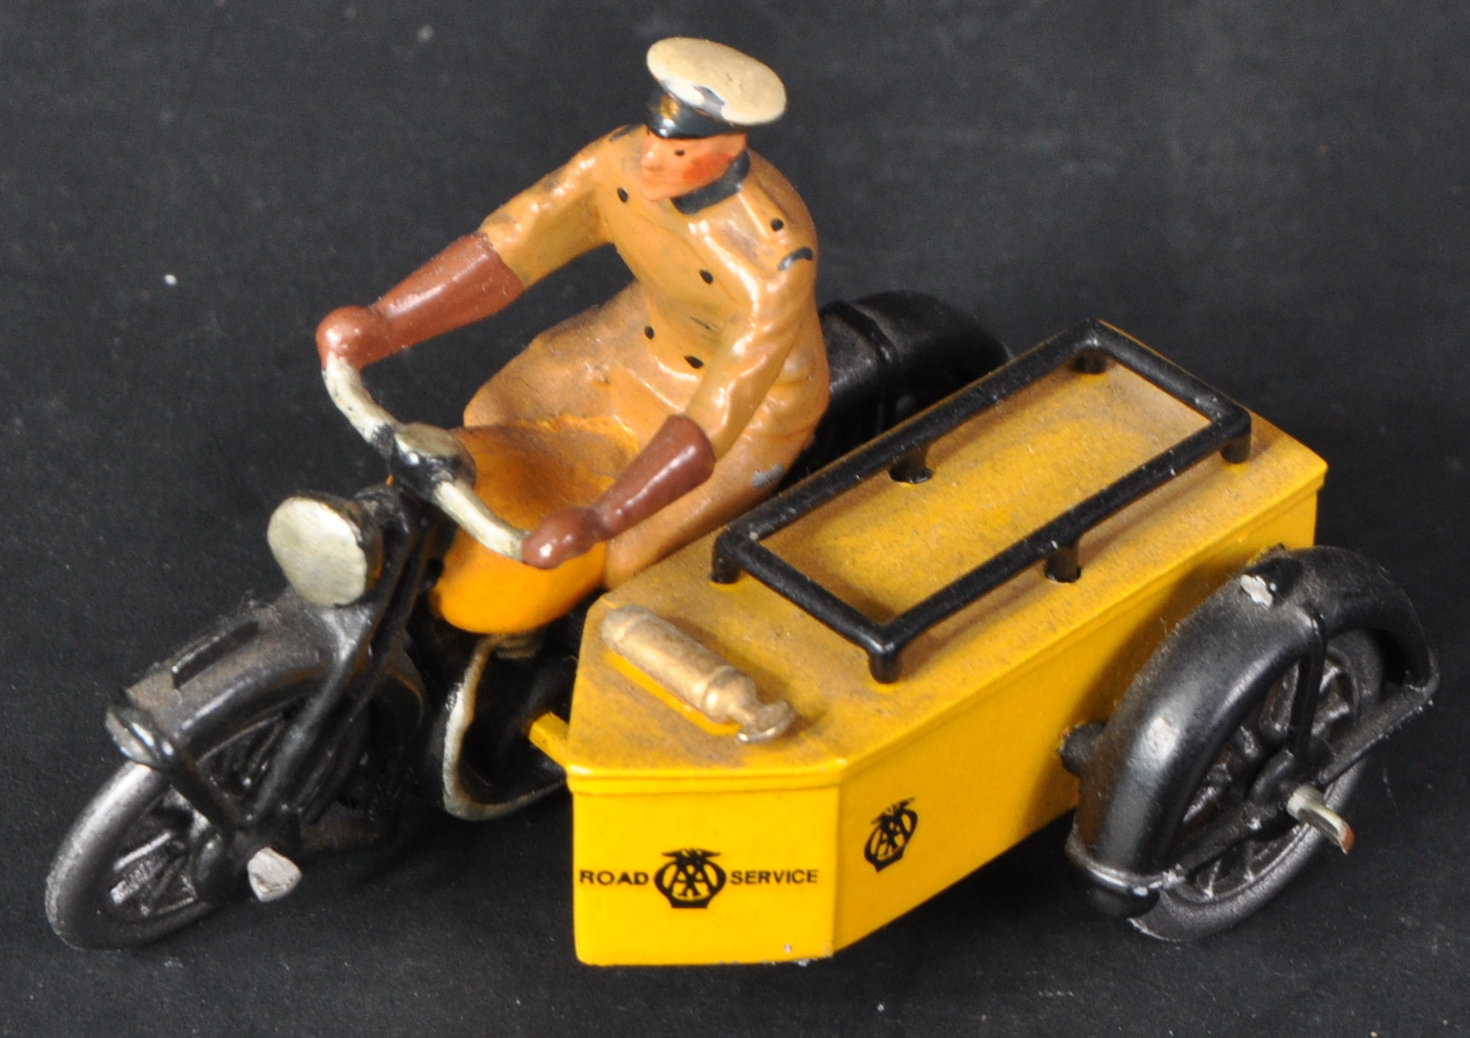 TWO VINTAGE DGM DAVE GILBERT MODELS DIECAST MOTORBIKES - Image 5 of 7